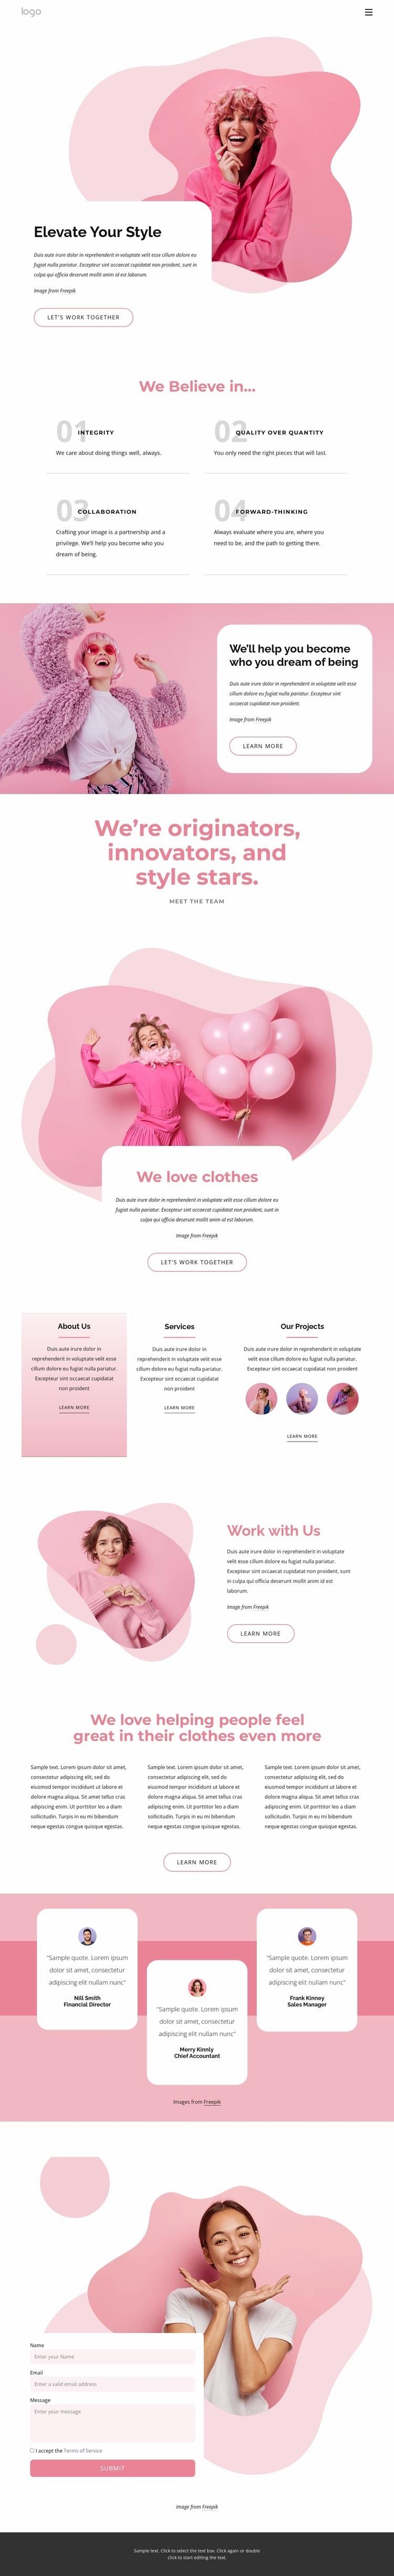 Elevate your style Homepage Design